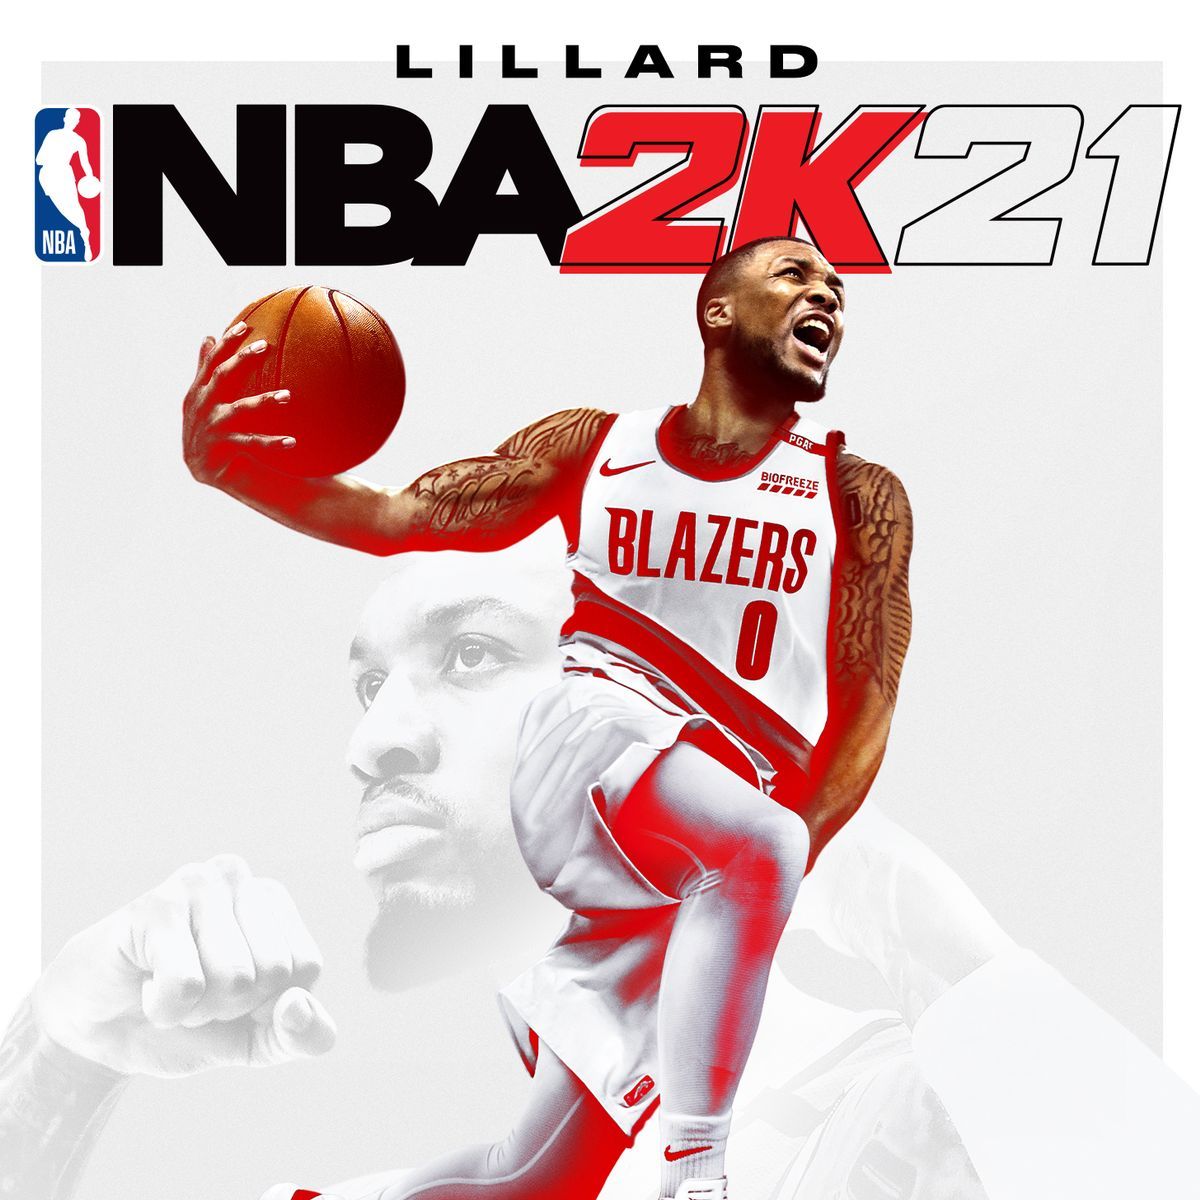 NBA 2K21 confirm Damian Lillard as cover star for PS4 and Xbox One